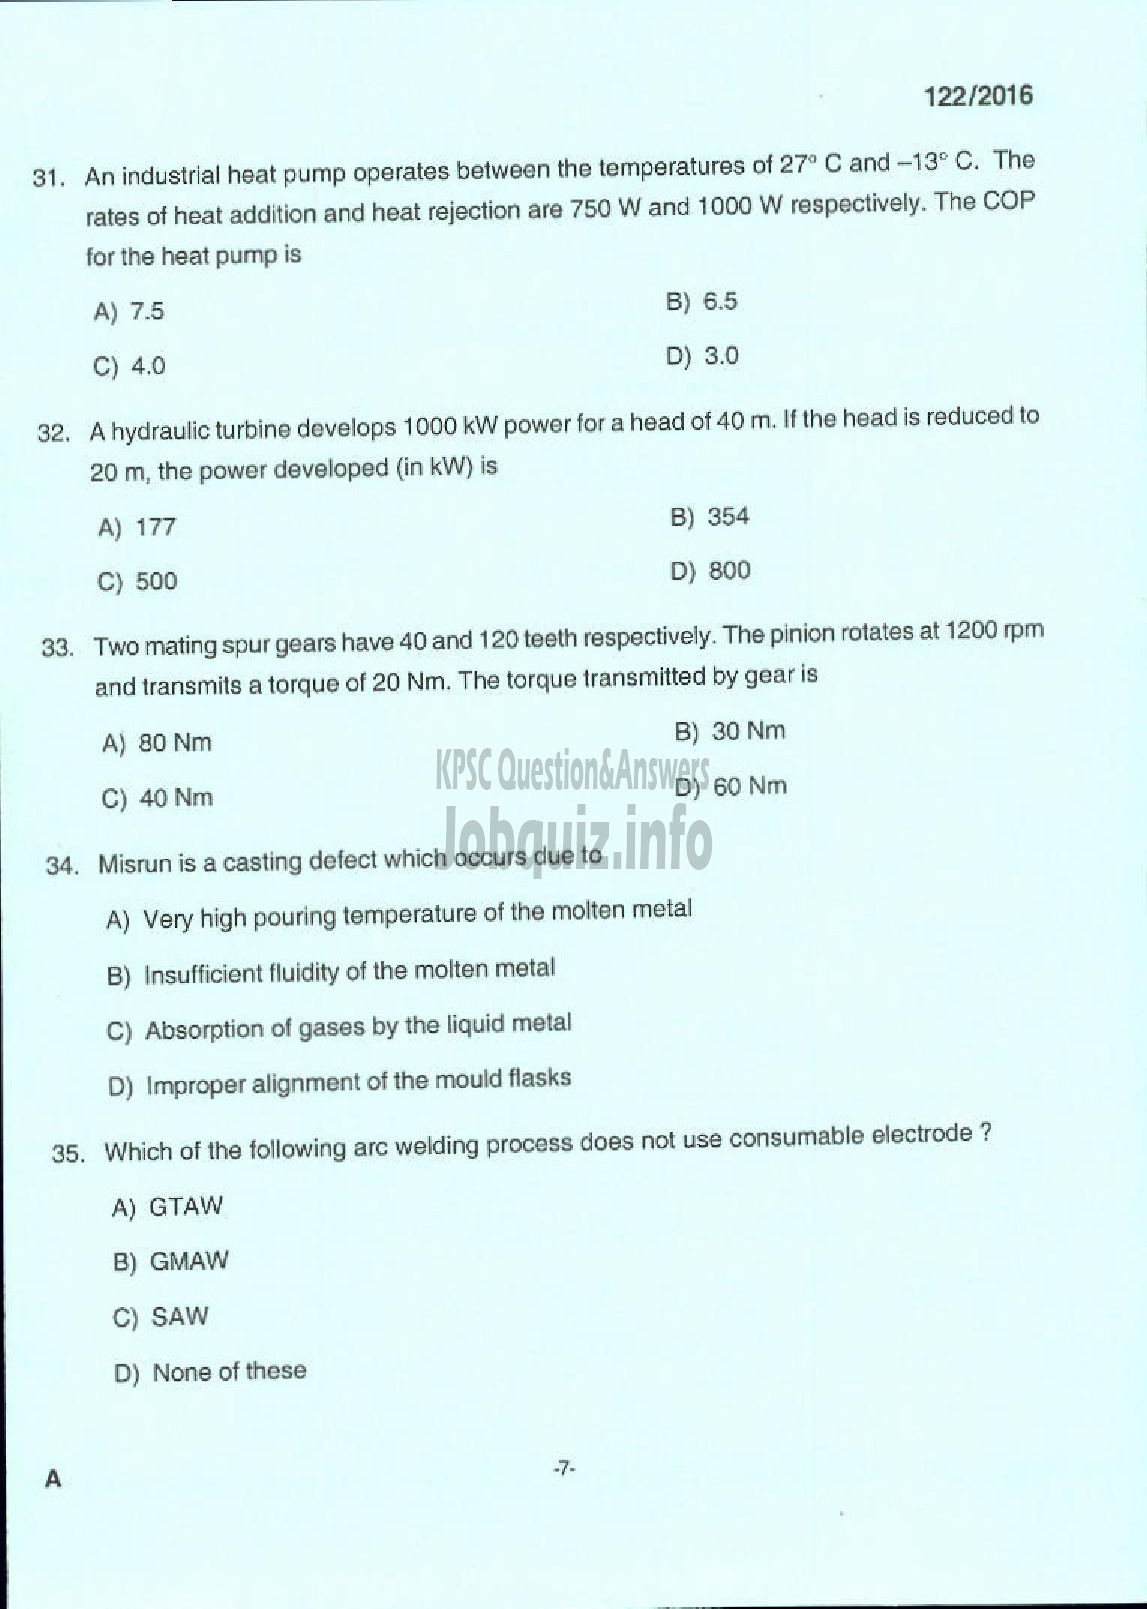 Kerala PSC Question Paper - ASSISTANT PROFESSOR MECHANICAL ENGINEERING TECHNICAL EDUCATION ENGINEERING DCOLLEGES-5